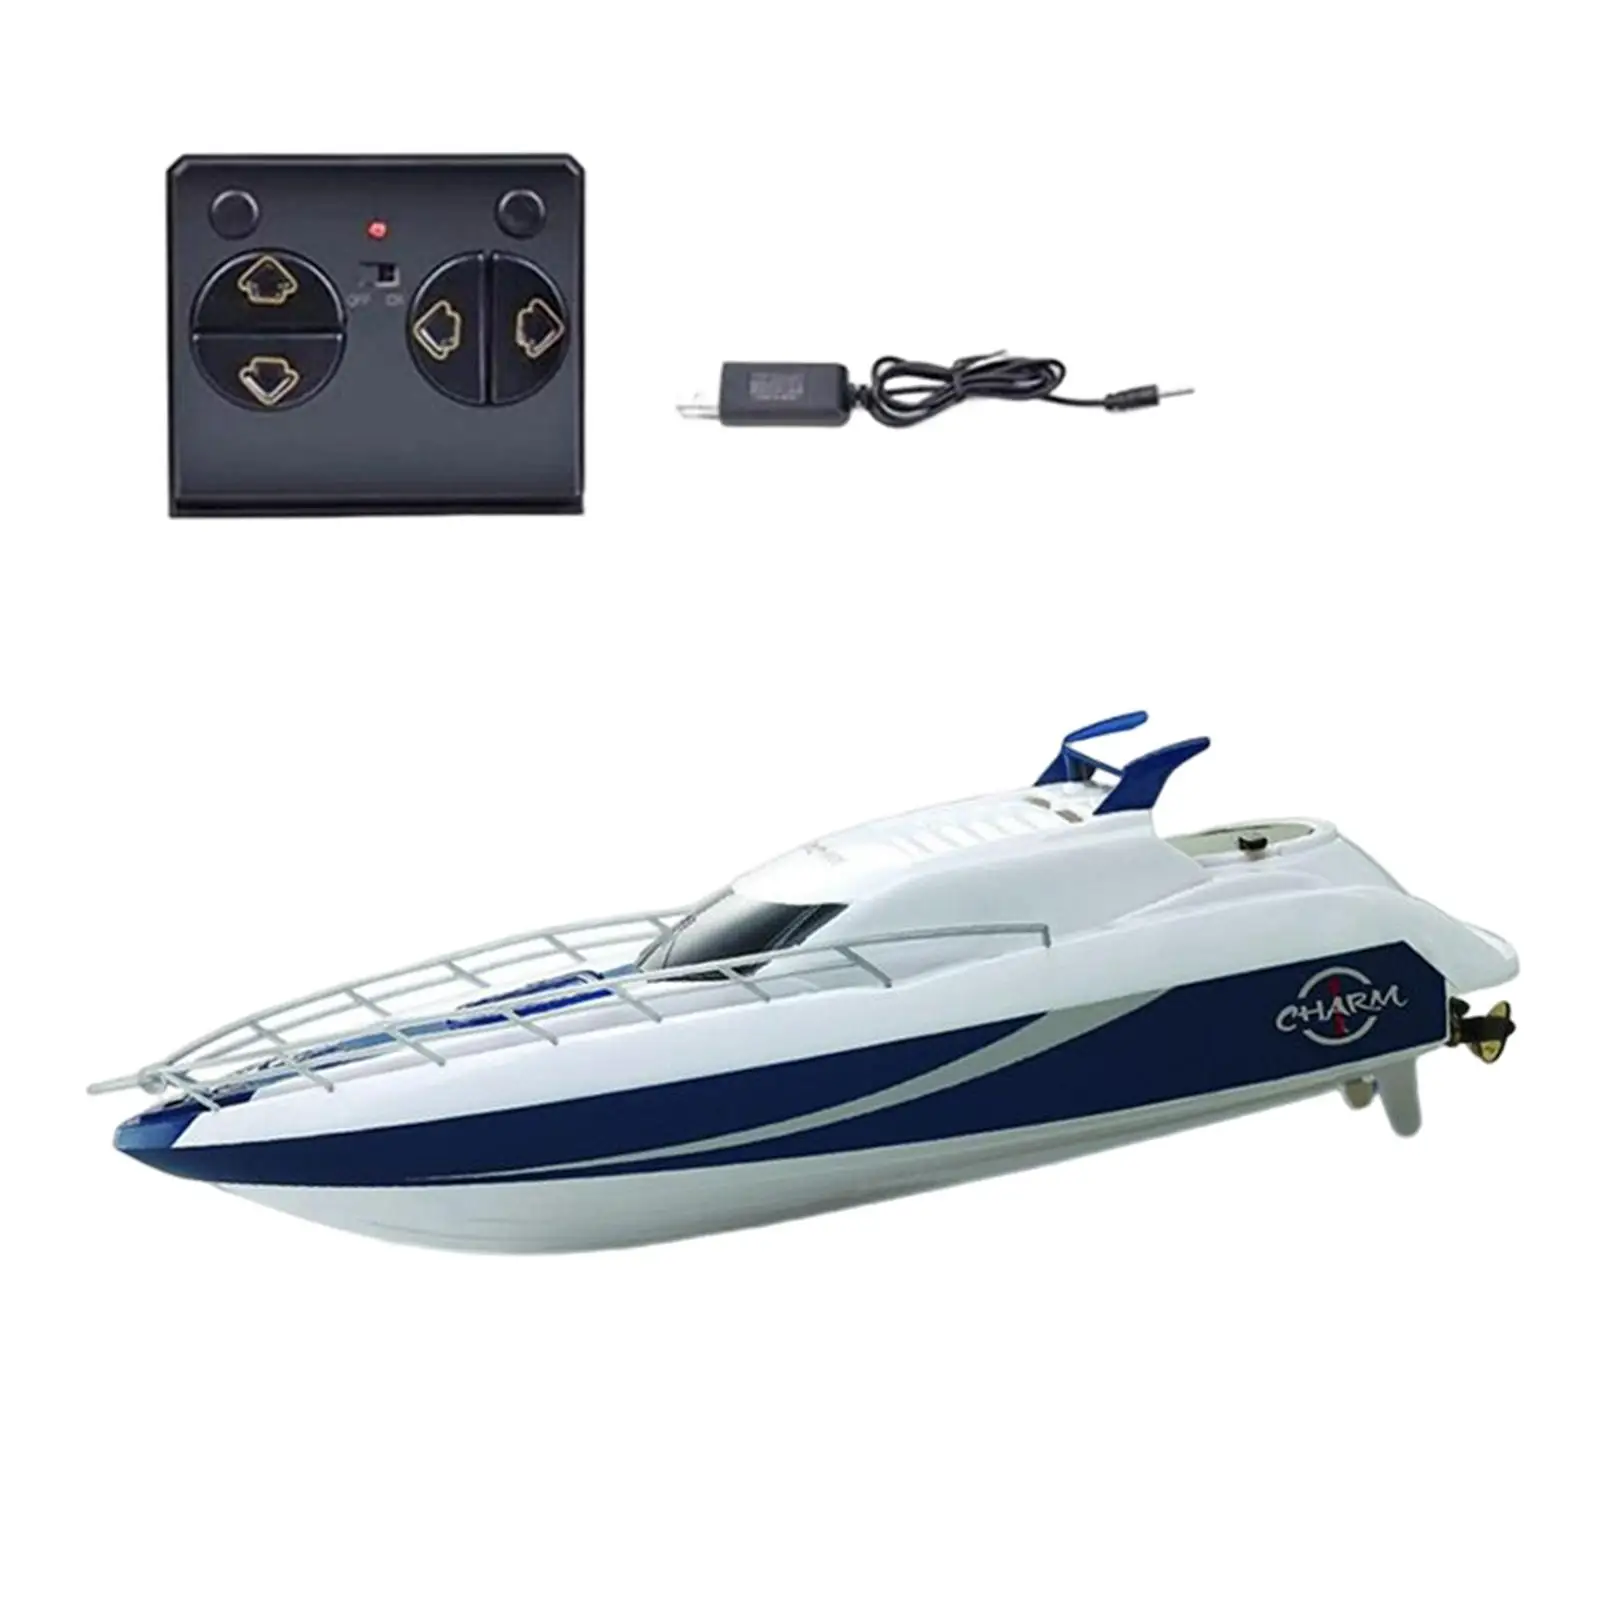 Portable Remote Control Boat Speedboat USB Rechargeable RC Boat Warship Model for Children Boys Beginner Girls Gifts